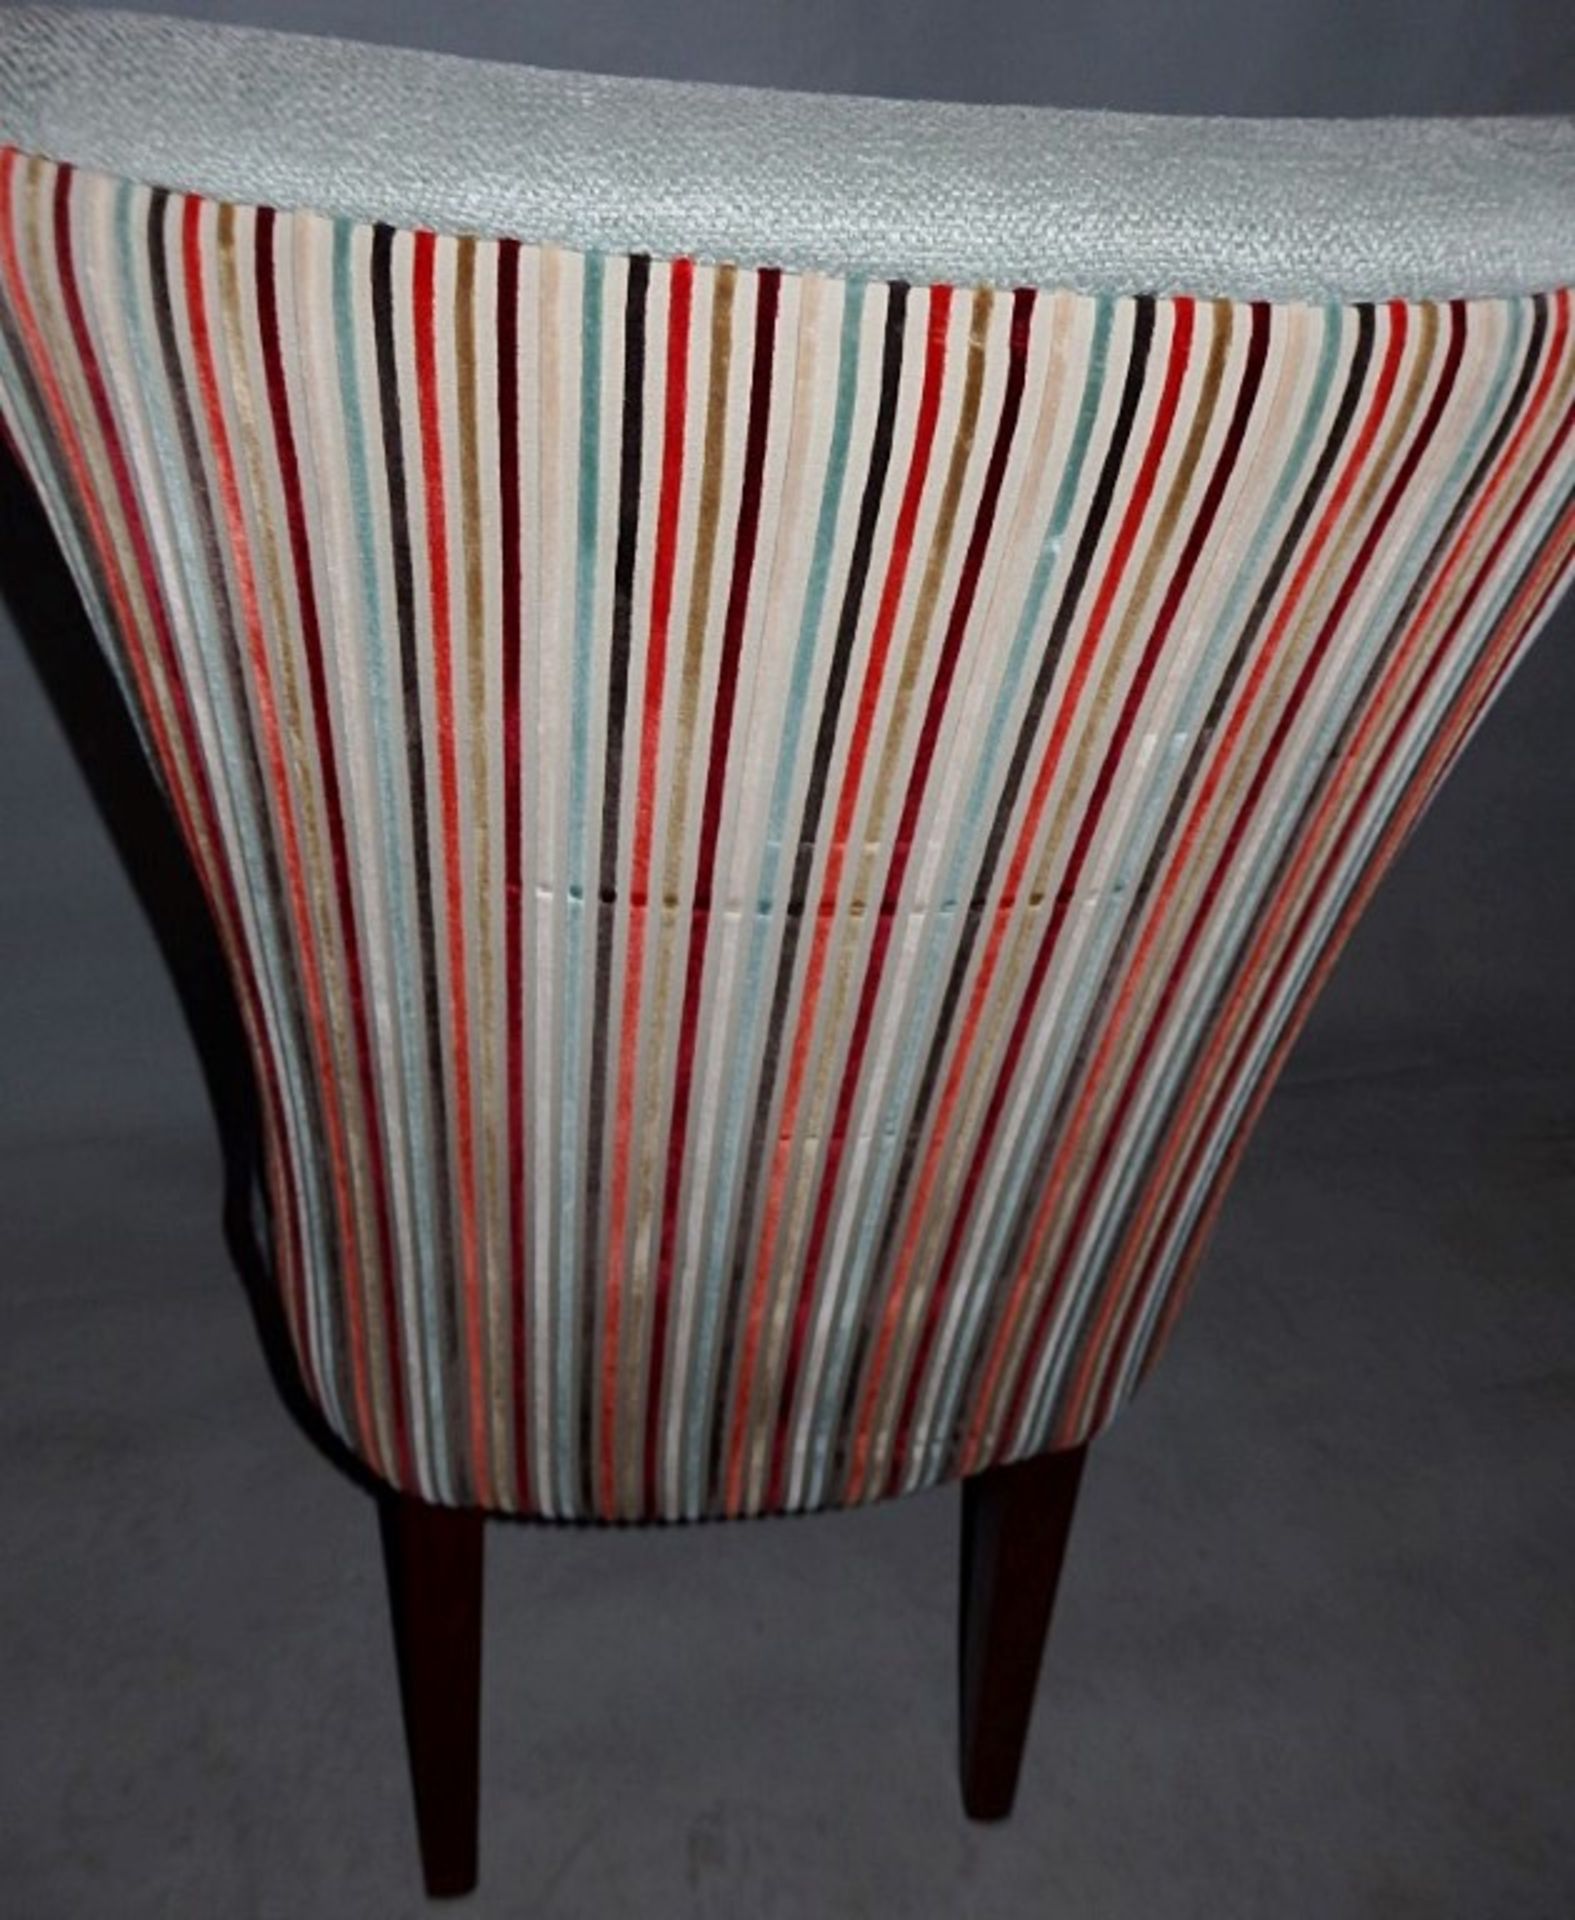 1 x Bespoke Chair - Covered In A Mint Chenille Fabric To The Front, And A Colourful Strioed Chenille - Image 5 of 5